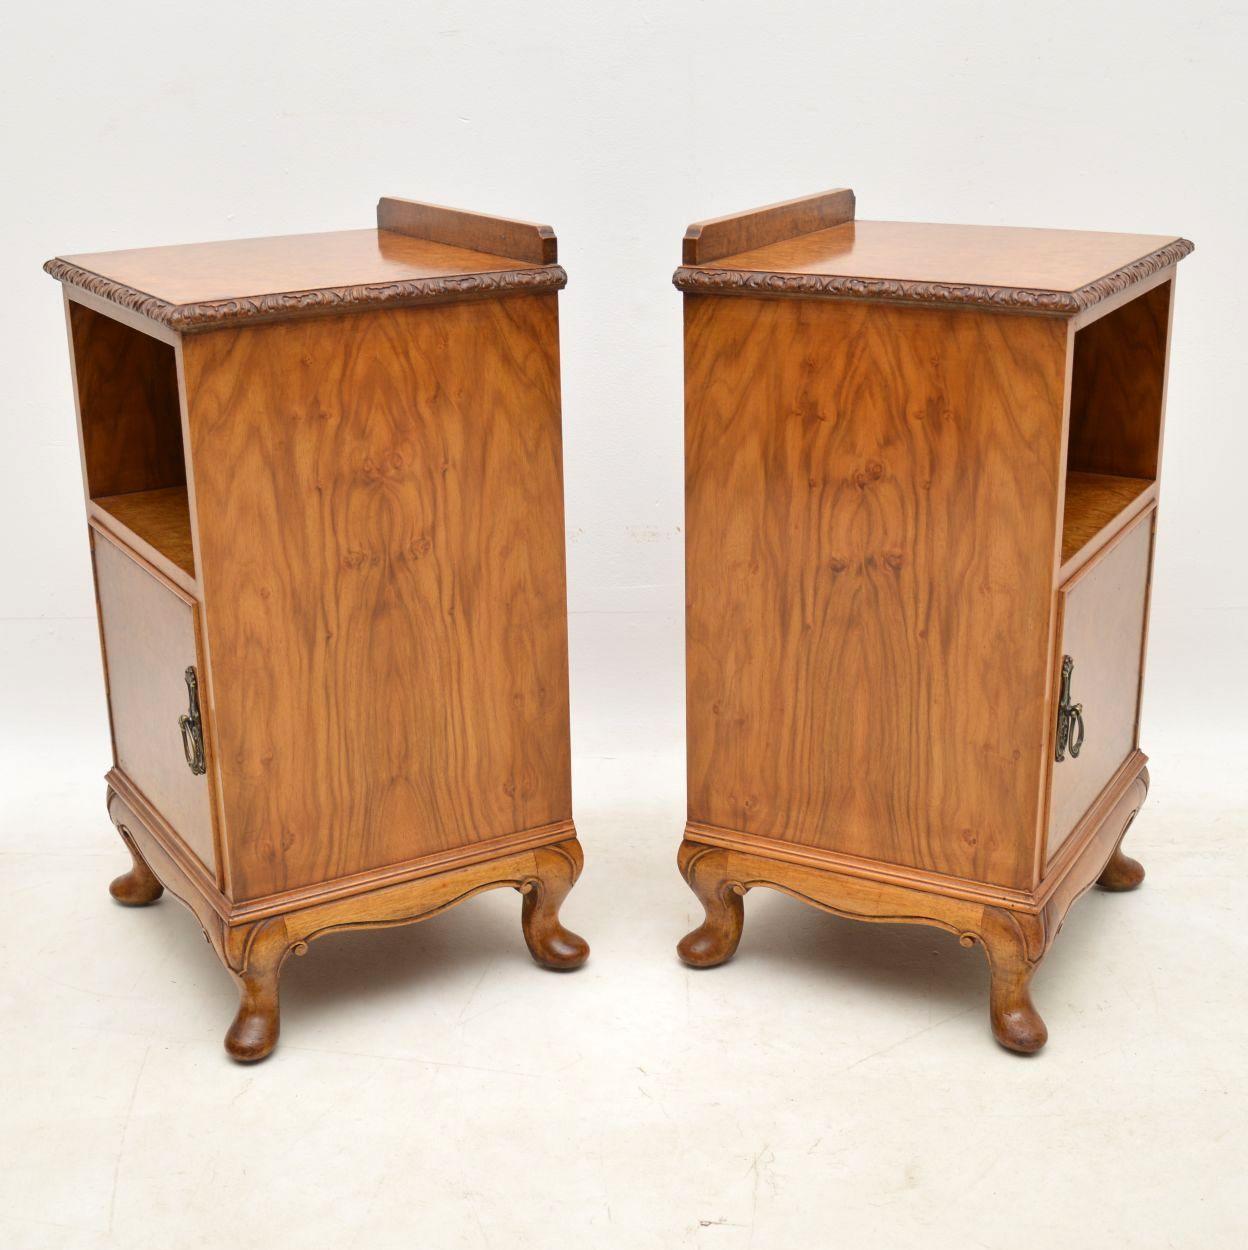 English Pair of Antique Burr Walnut Bedside Cabinets